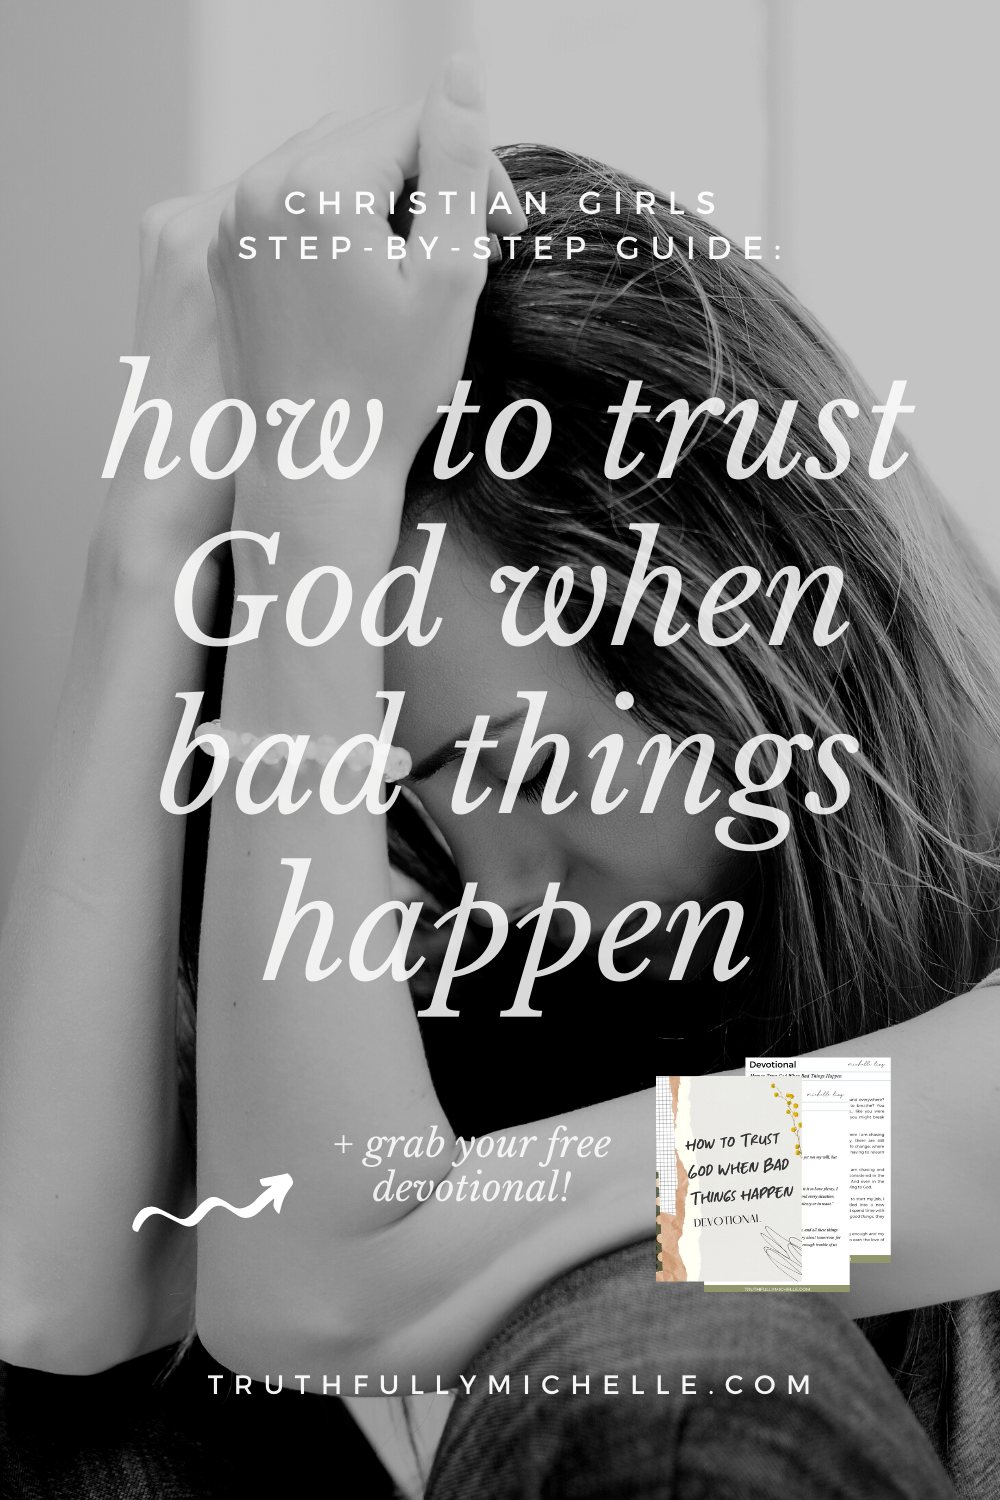 how to trust God completely, trusting God in all circumstances, trusting God in hard times, how to trust God in difficult times, how to trust God completely, how to trust God when bad things happen, how to have faith in God completely, trusting God in uncertainity, trusting in the storm, trusting God in the unknown, trusting God in the dark, trusting God in the waiting, trusting God in difficult times, trusting God in everything, how to develop trust in God